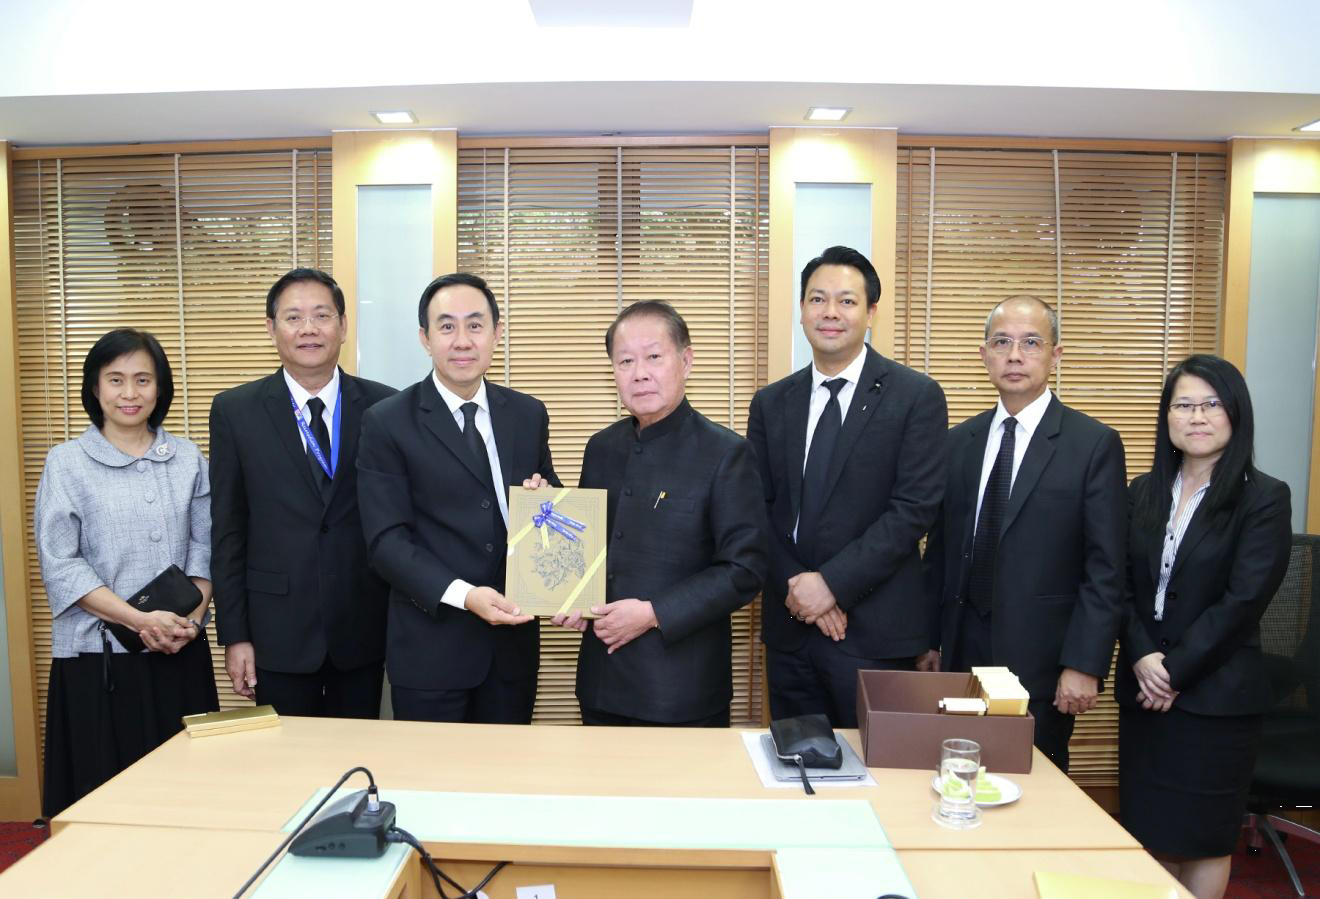 EXIM Thailand Visits Deputy Minister of Finance to Extend New Year 2017 Greetings